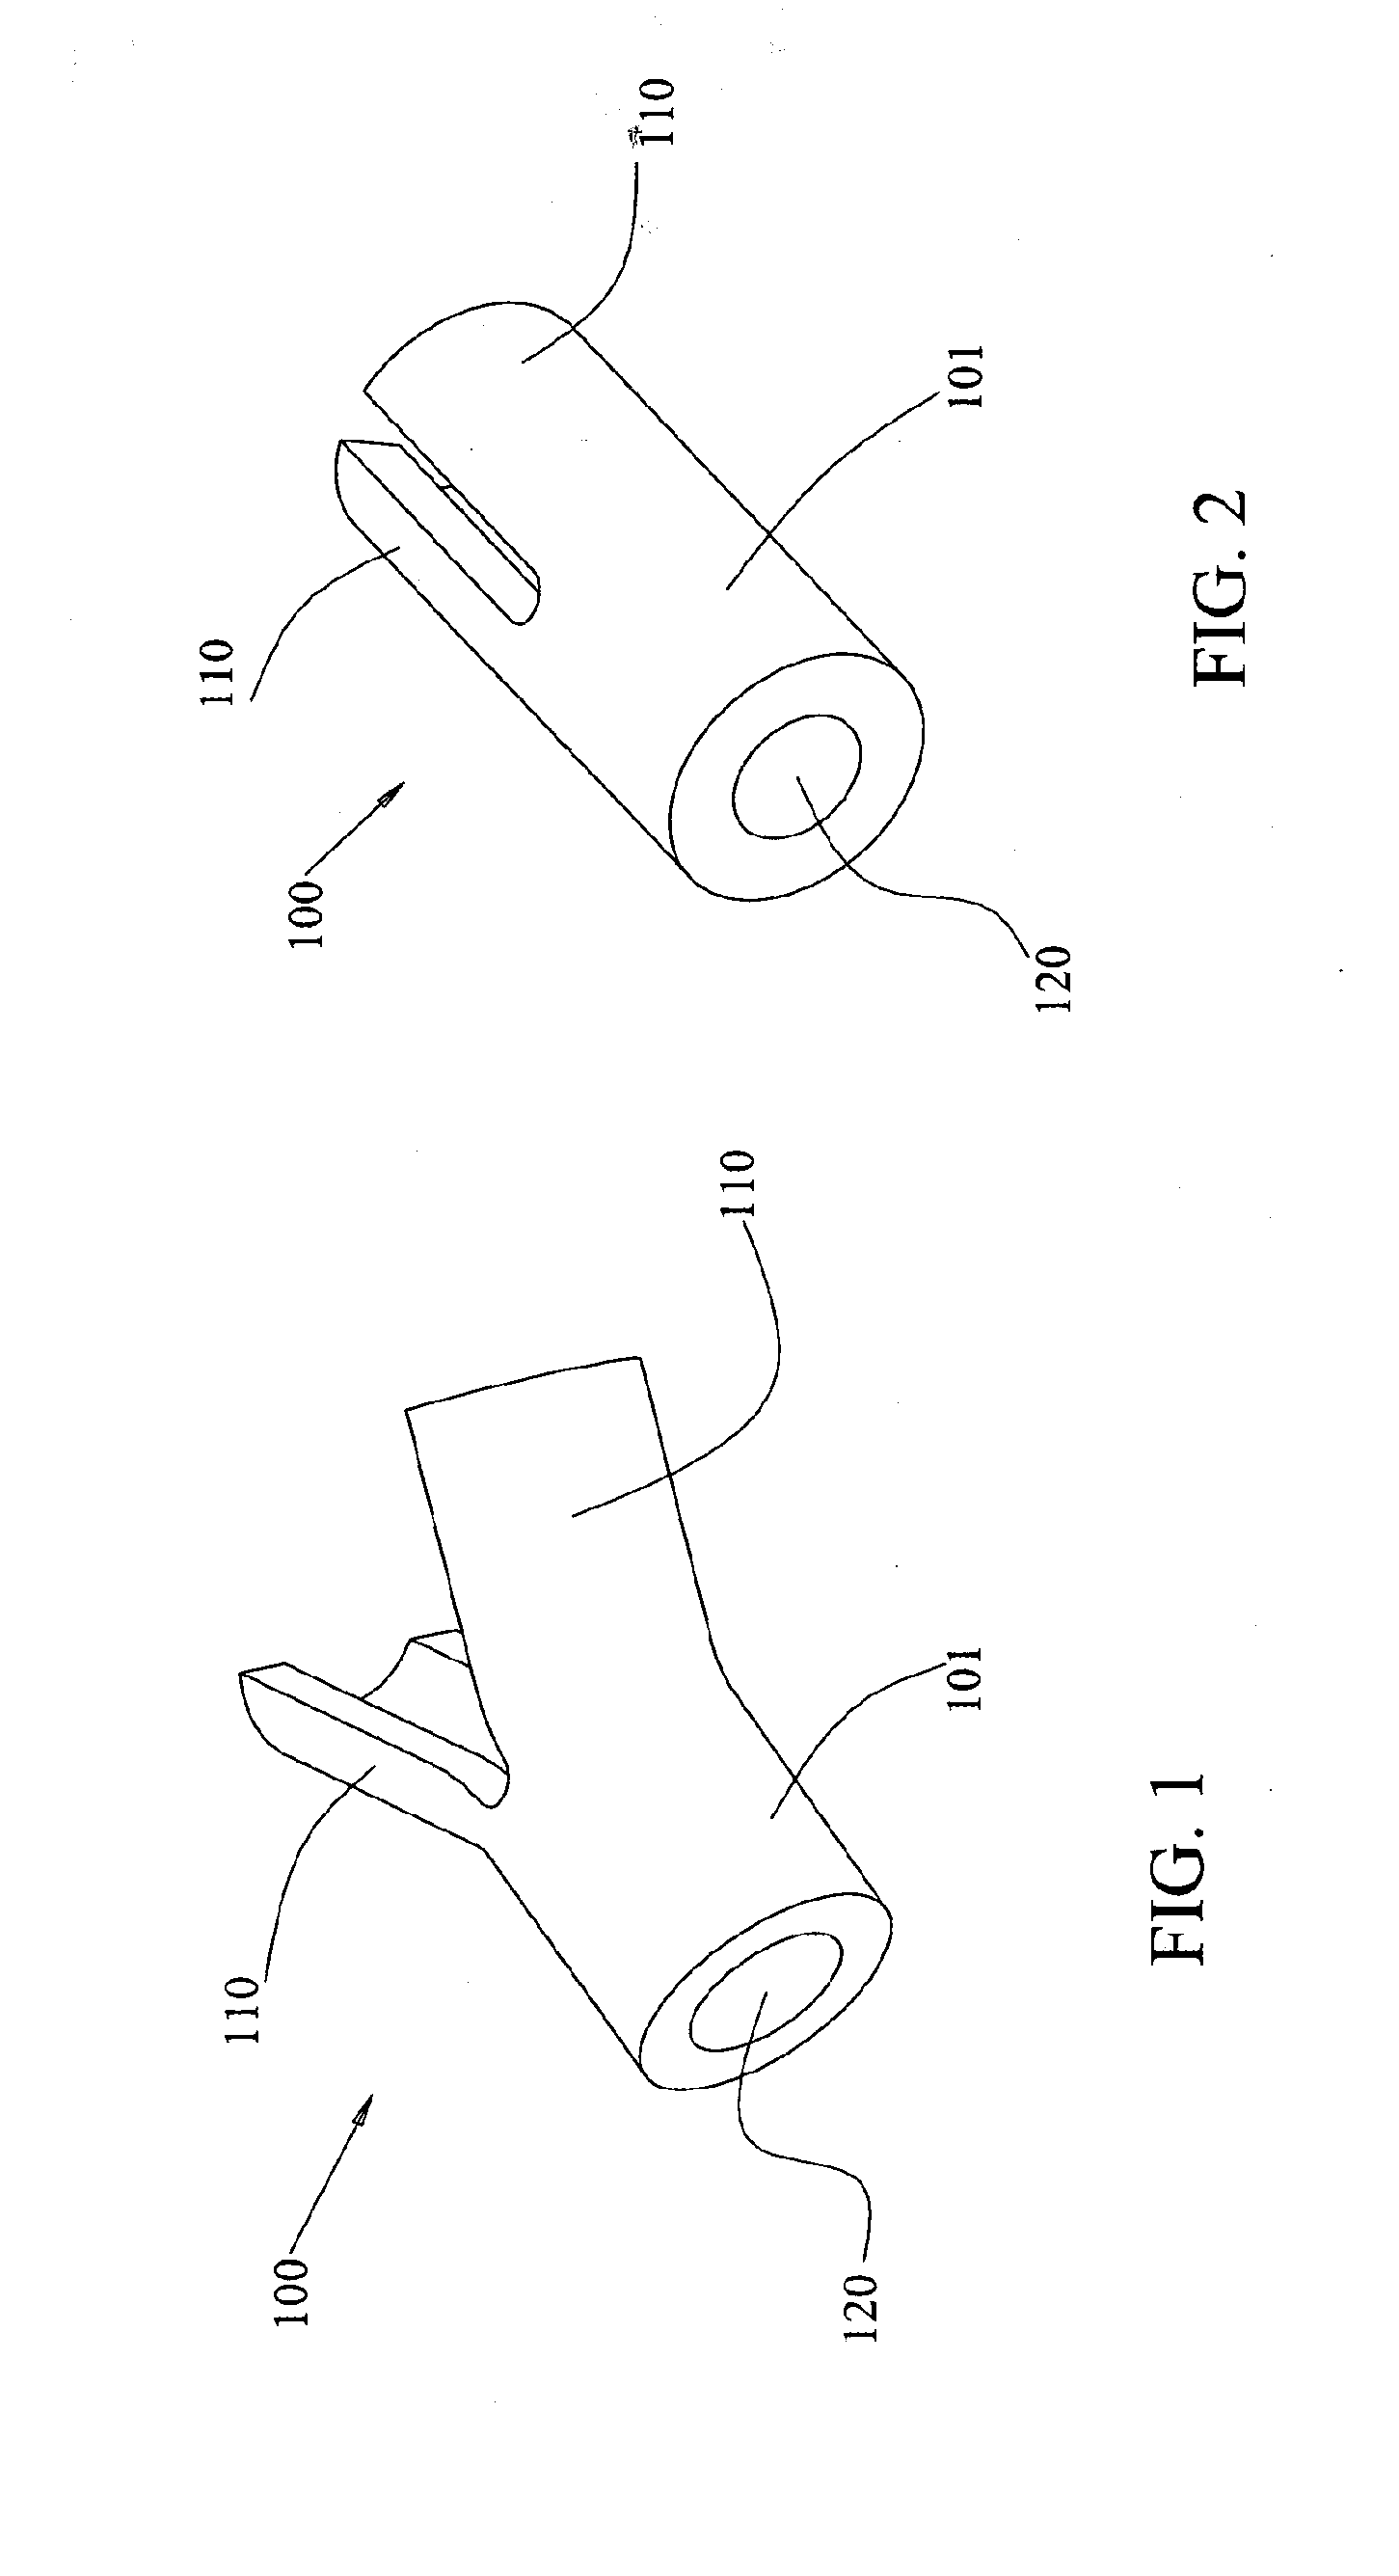 Hair implant anchors and systems and methods for use thereof